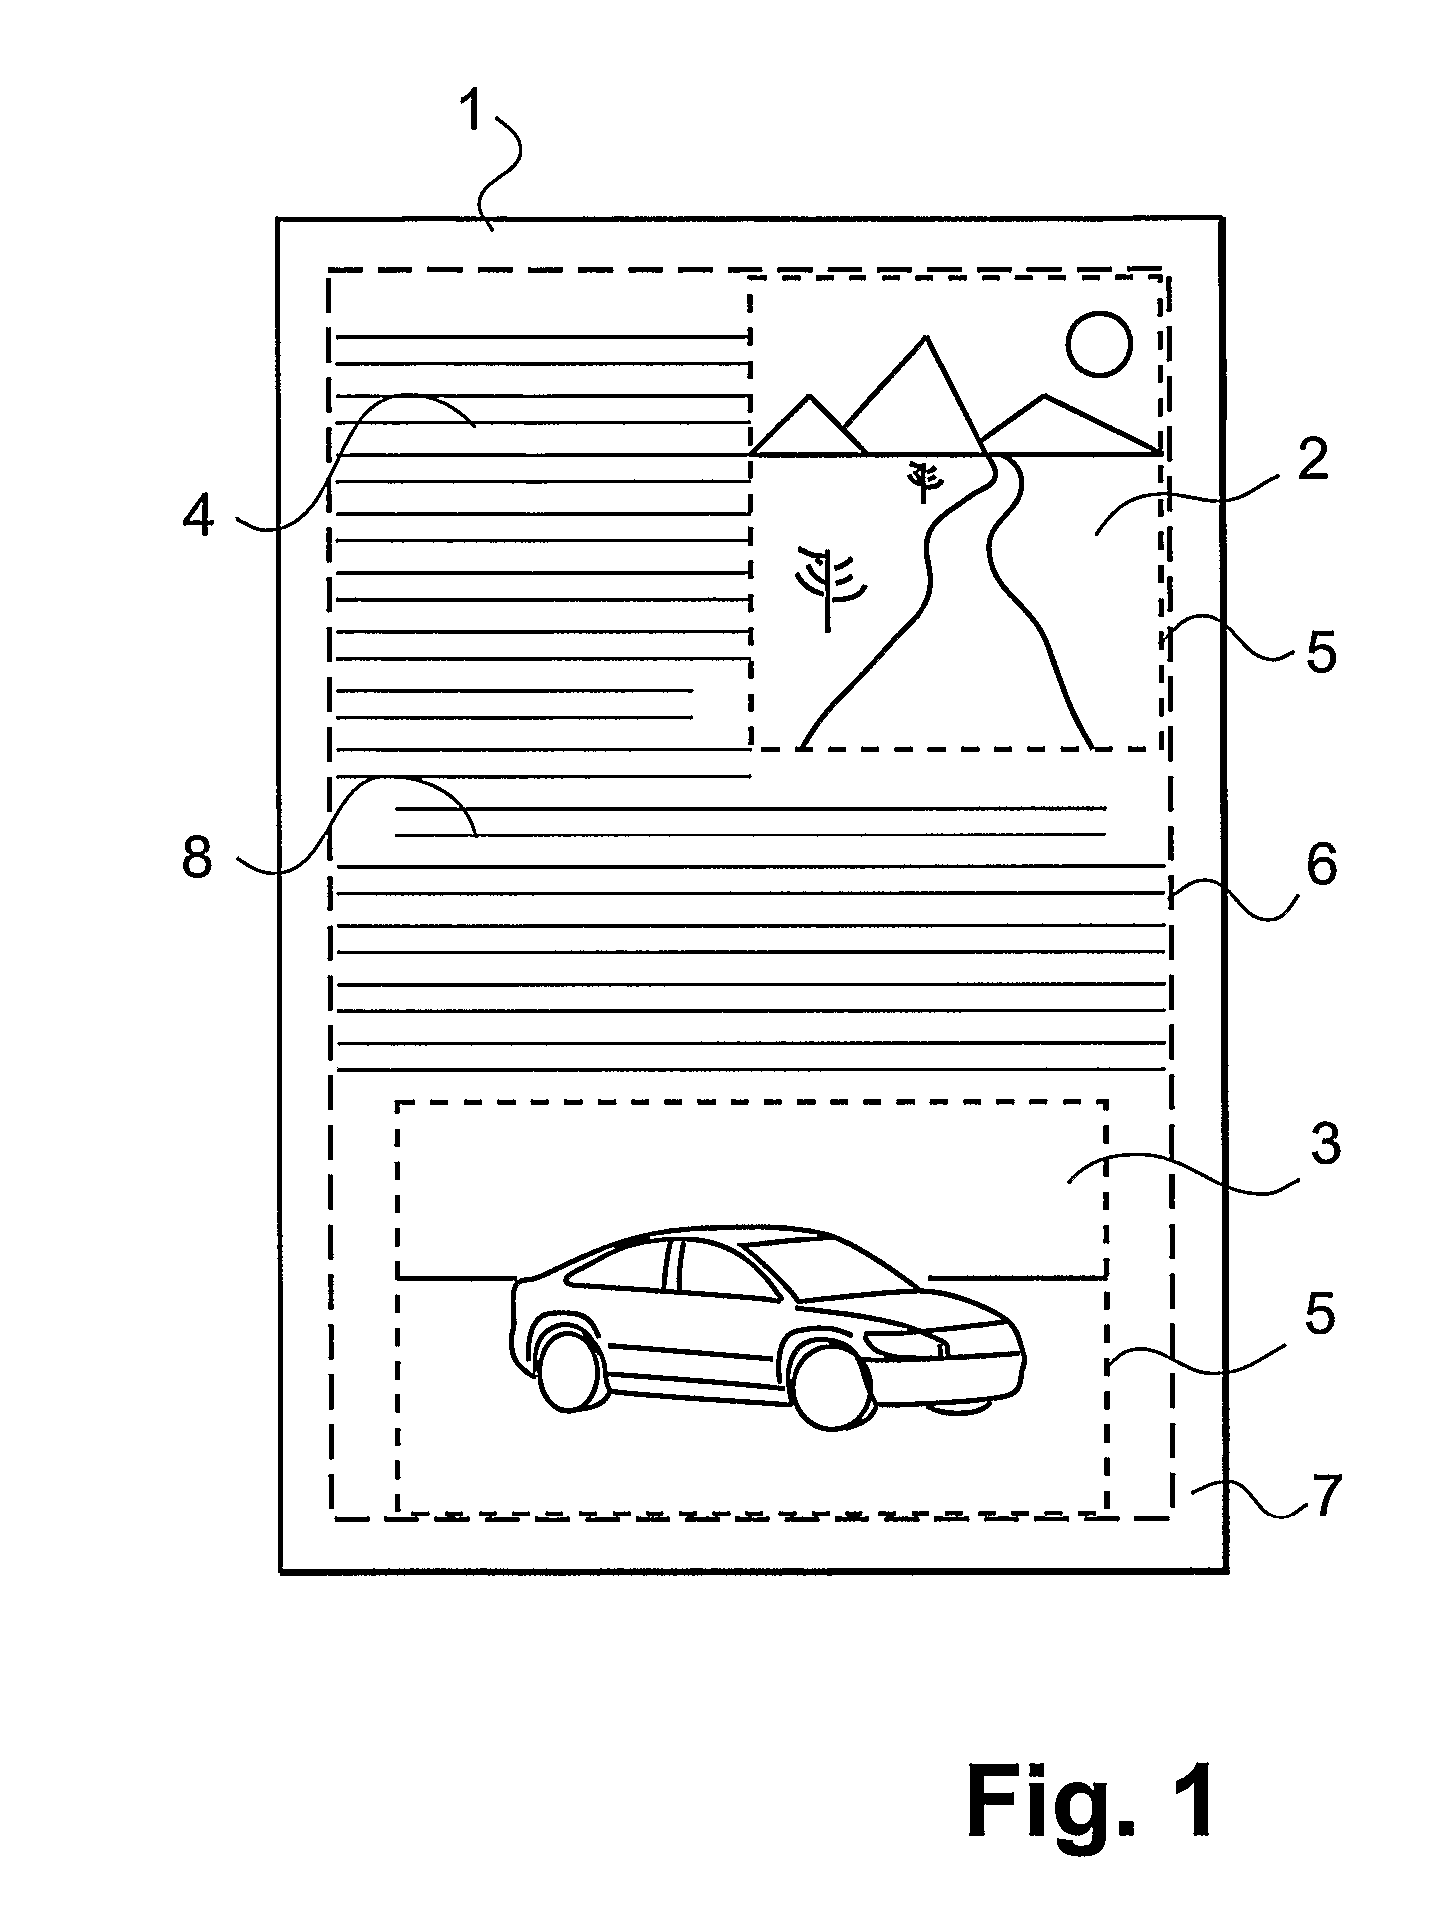 Method and Apparatus for Coating a Substrate and Printed Matter